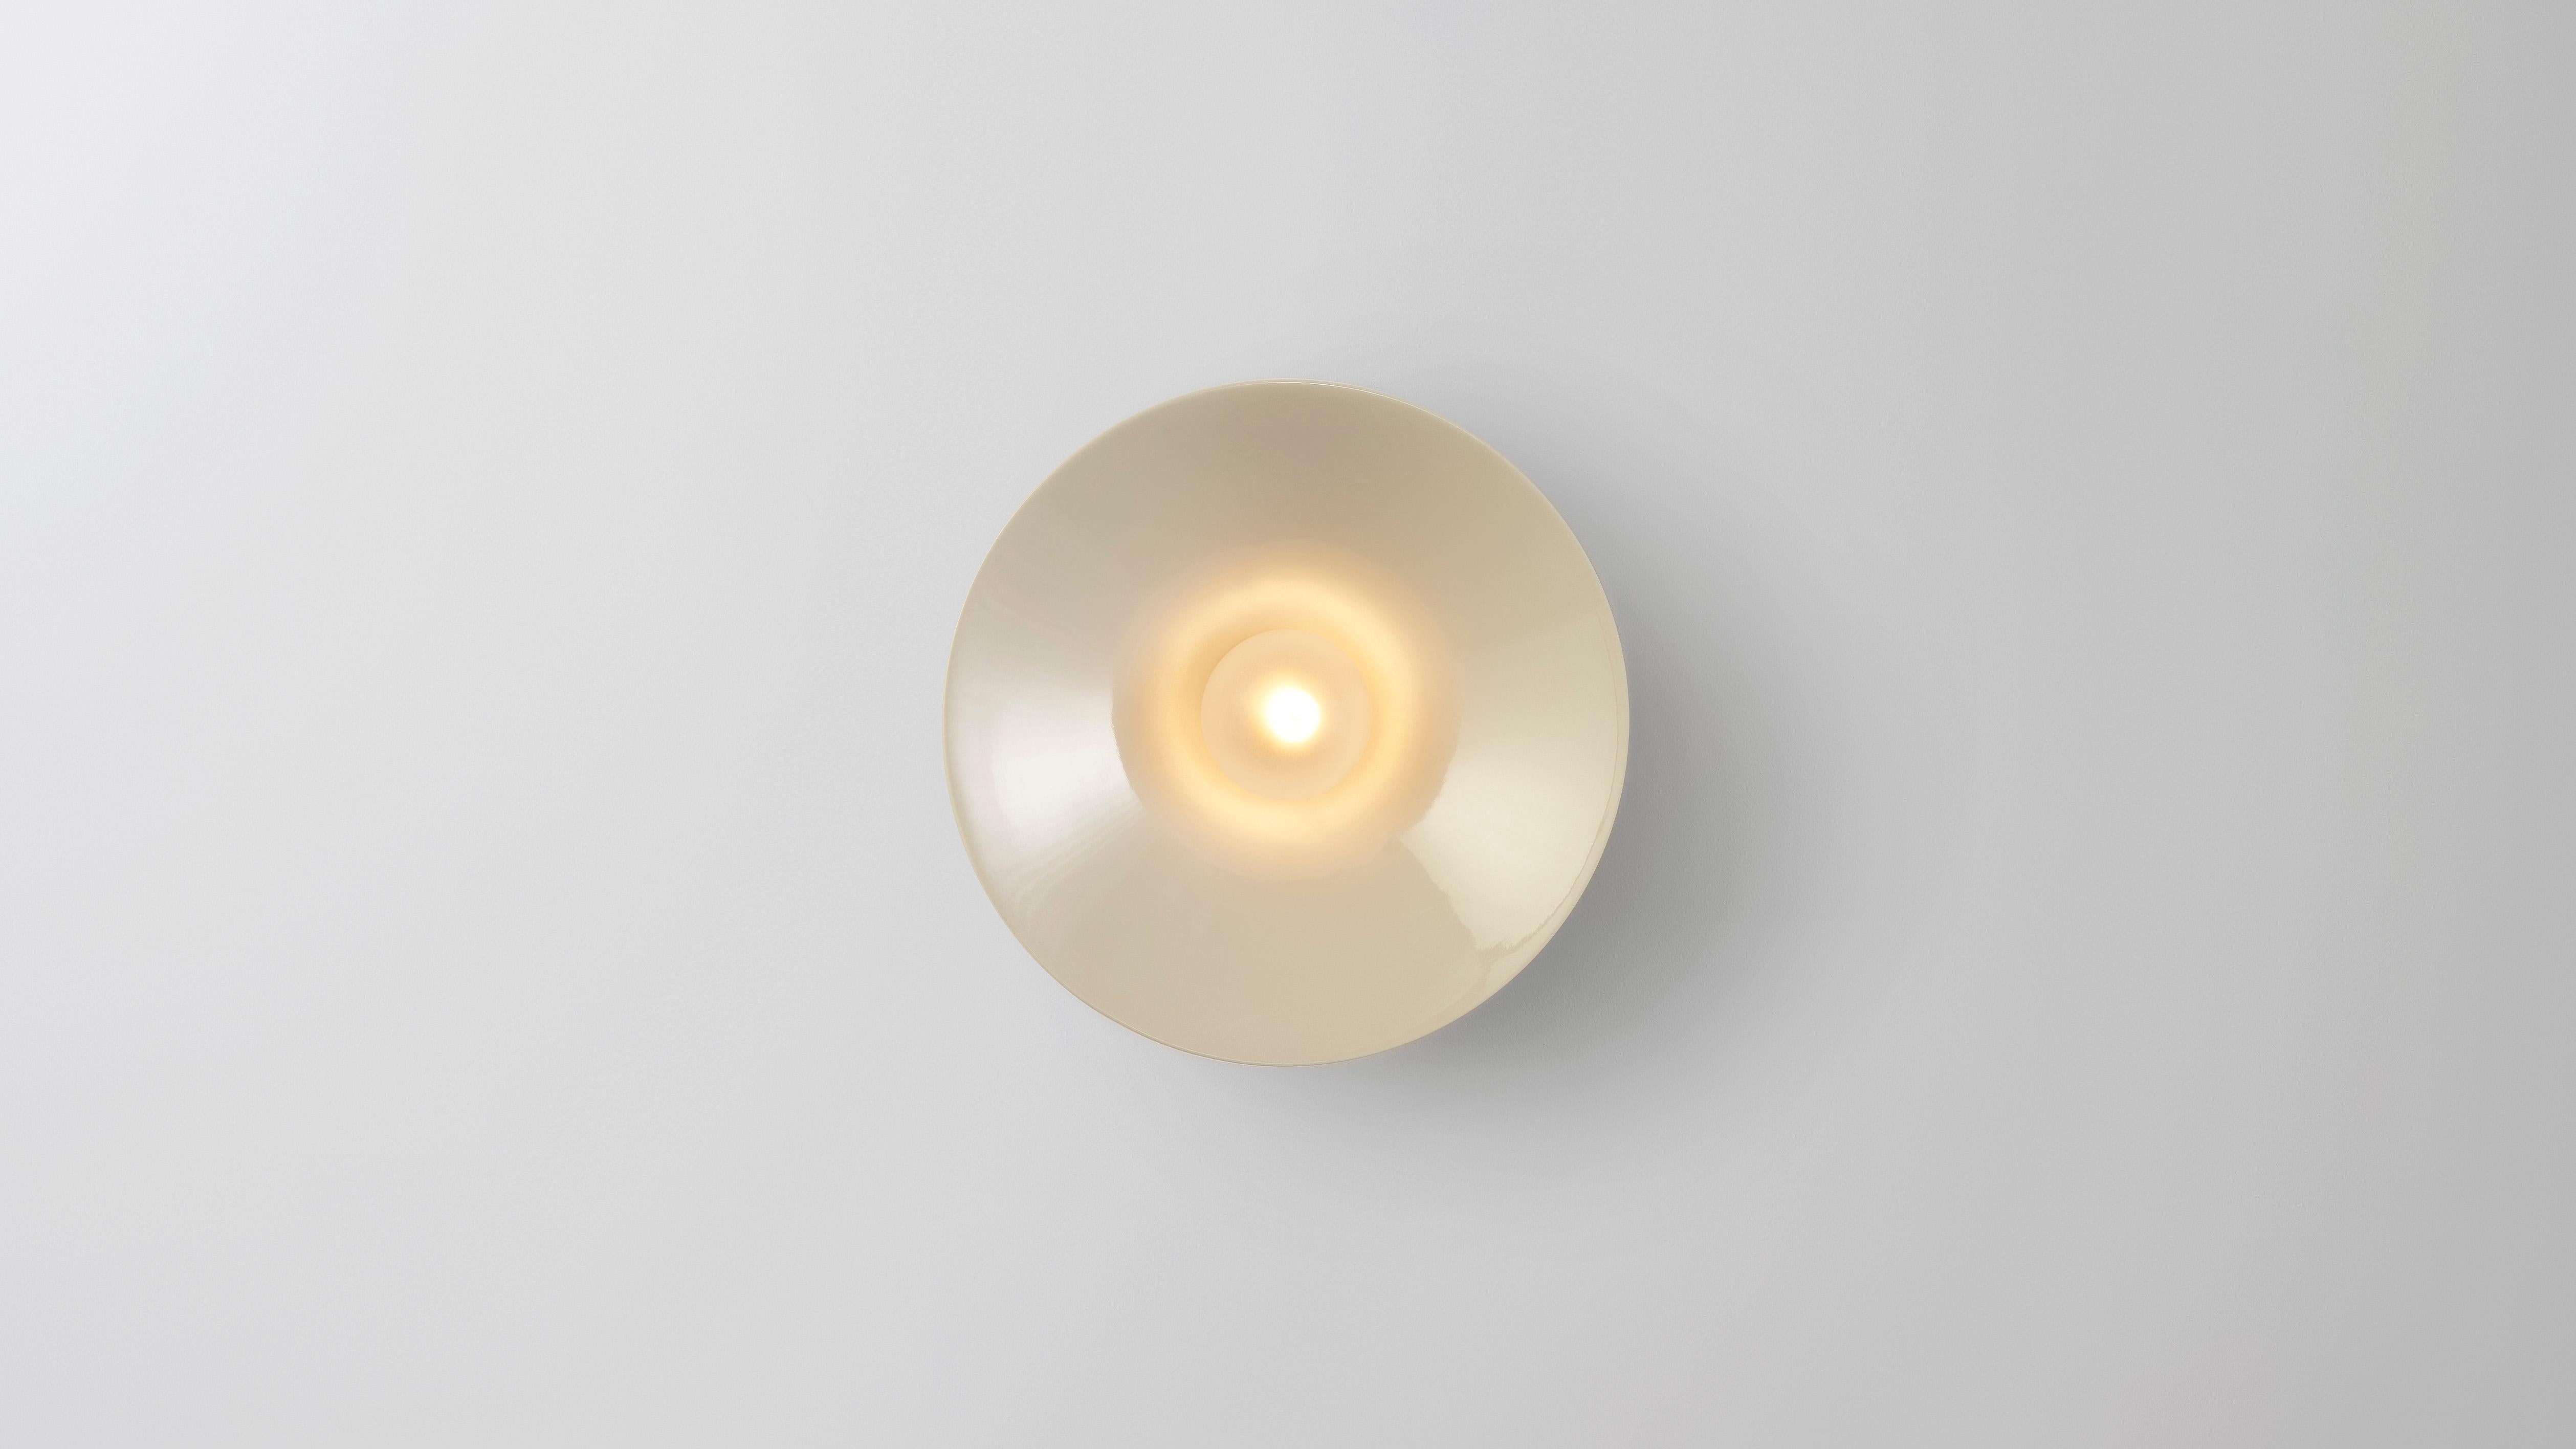 Anton in ceramic by Volker Haug
Anton series
Dimensions: W 18, H 18, D 10.3 cm
Materials: Cast ceramic
Glaze: Clear
Lamp: G9 LED (240V / 120V US). 12V option available
Glass bulb: 4.5 cm Ø, Frosted
Weight: 1.5kg

Form follows force. The Anton series